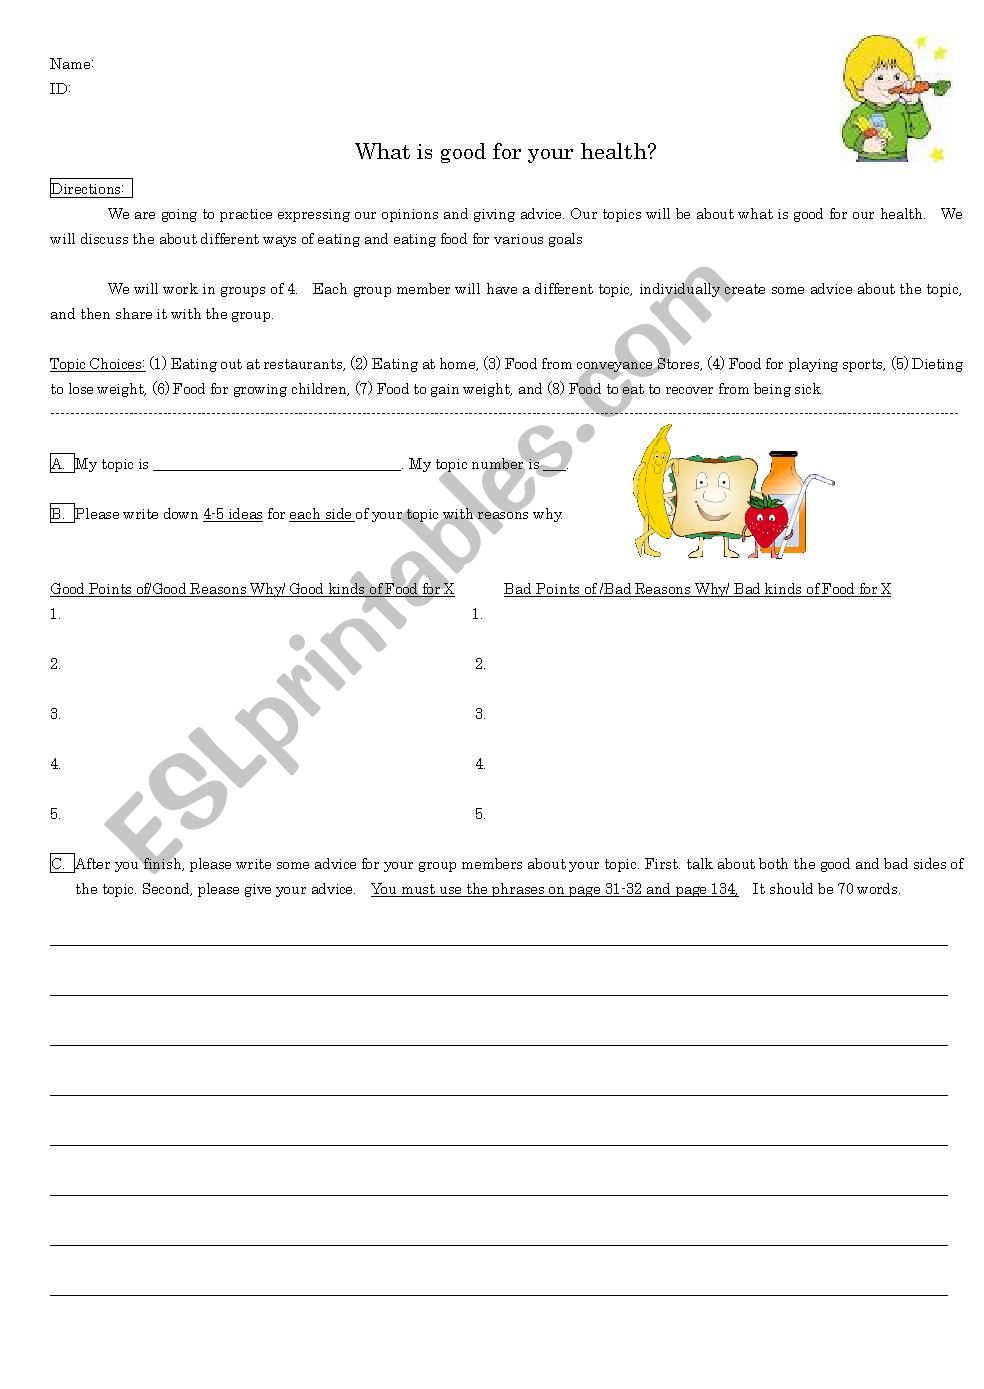 Health and Advice Project worksheet